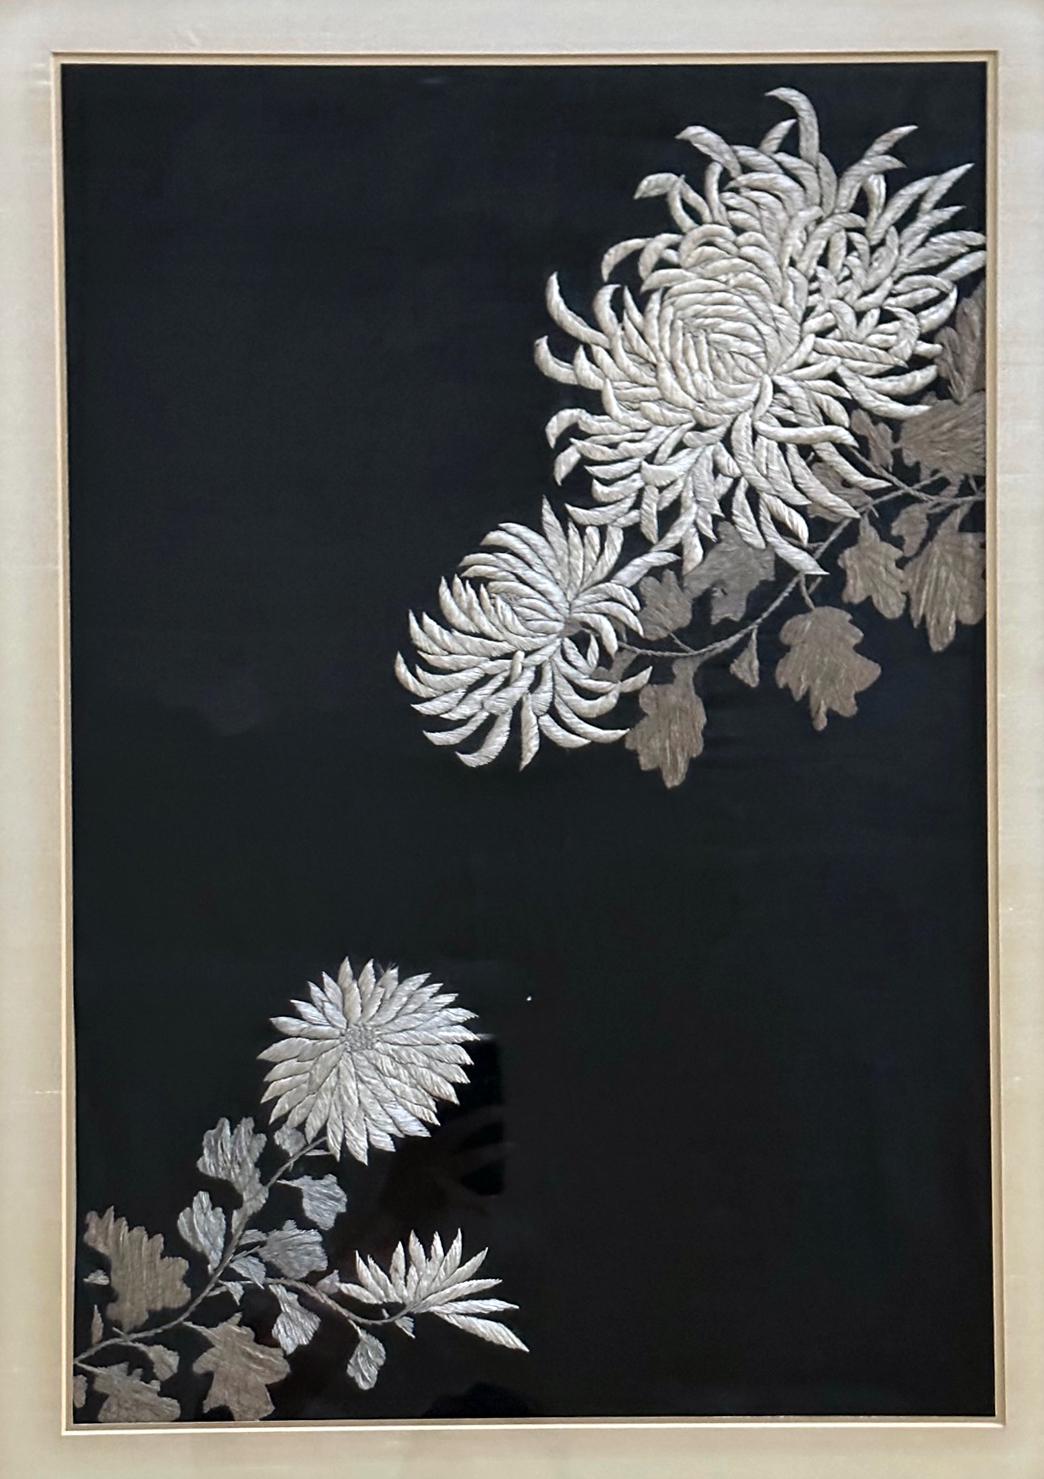 A Japanese textile panel with embroidered picture work circa late Meiji period (1900s) presented in a gilt wood frame with silk mat. The work depicts a lovely arrangement of two different varieties of Japanese chrysanthemum flowers. Silk threads of